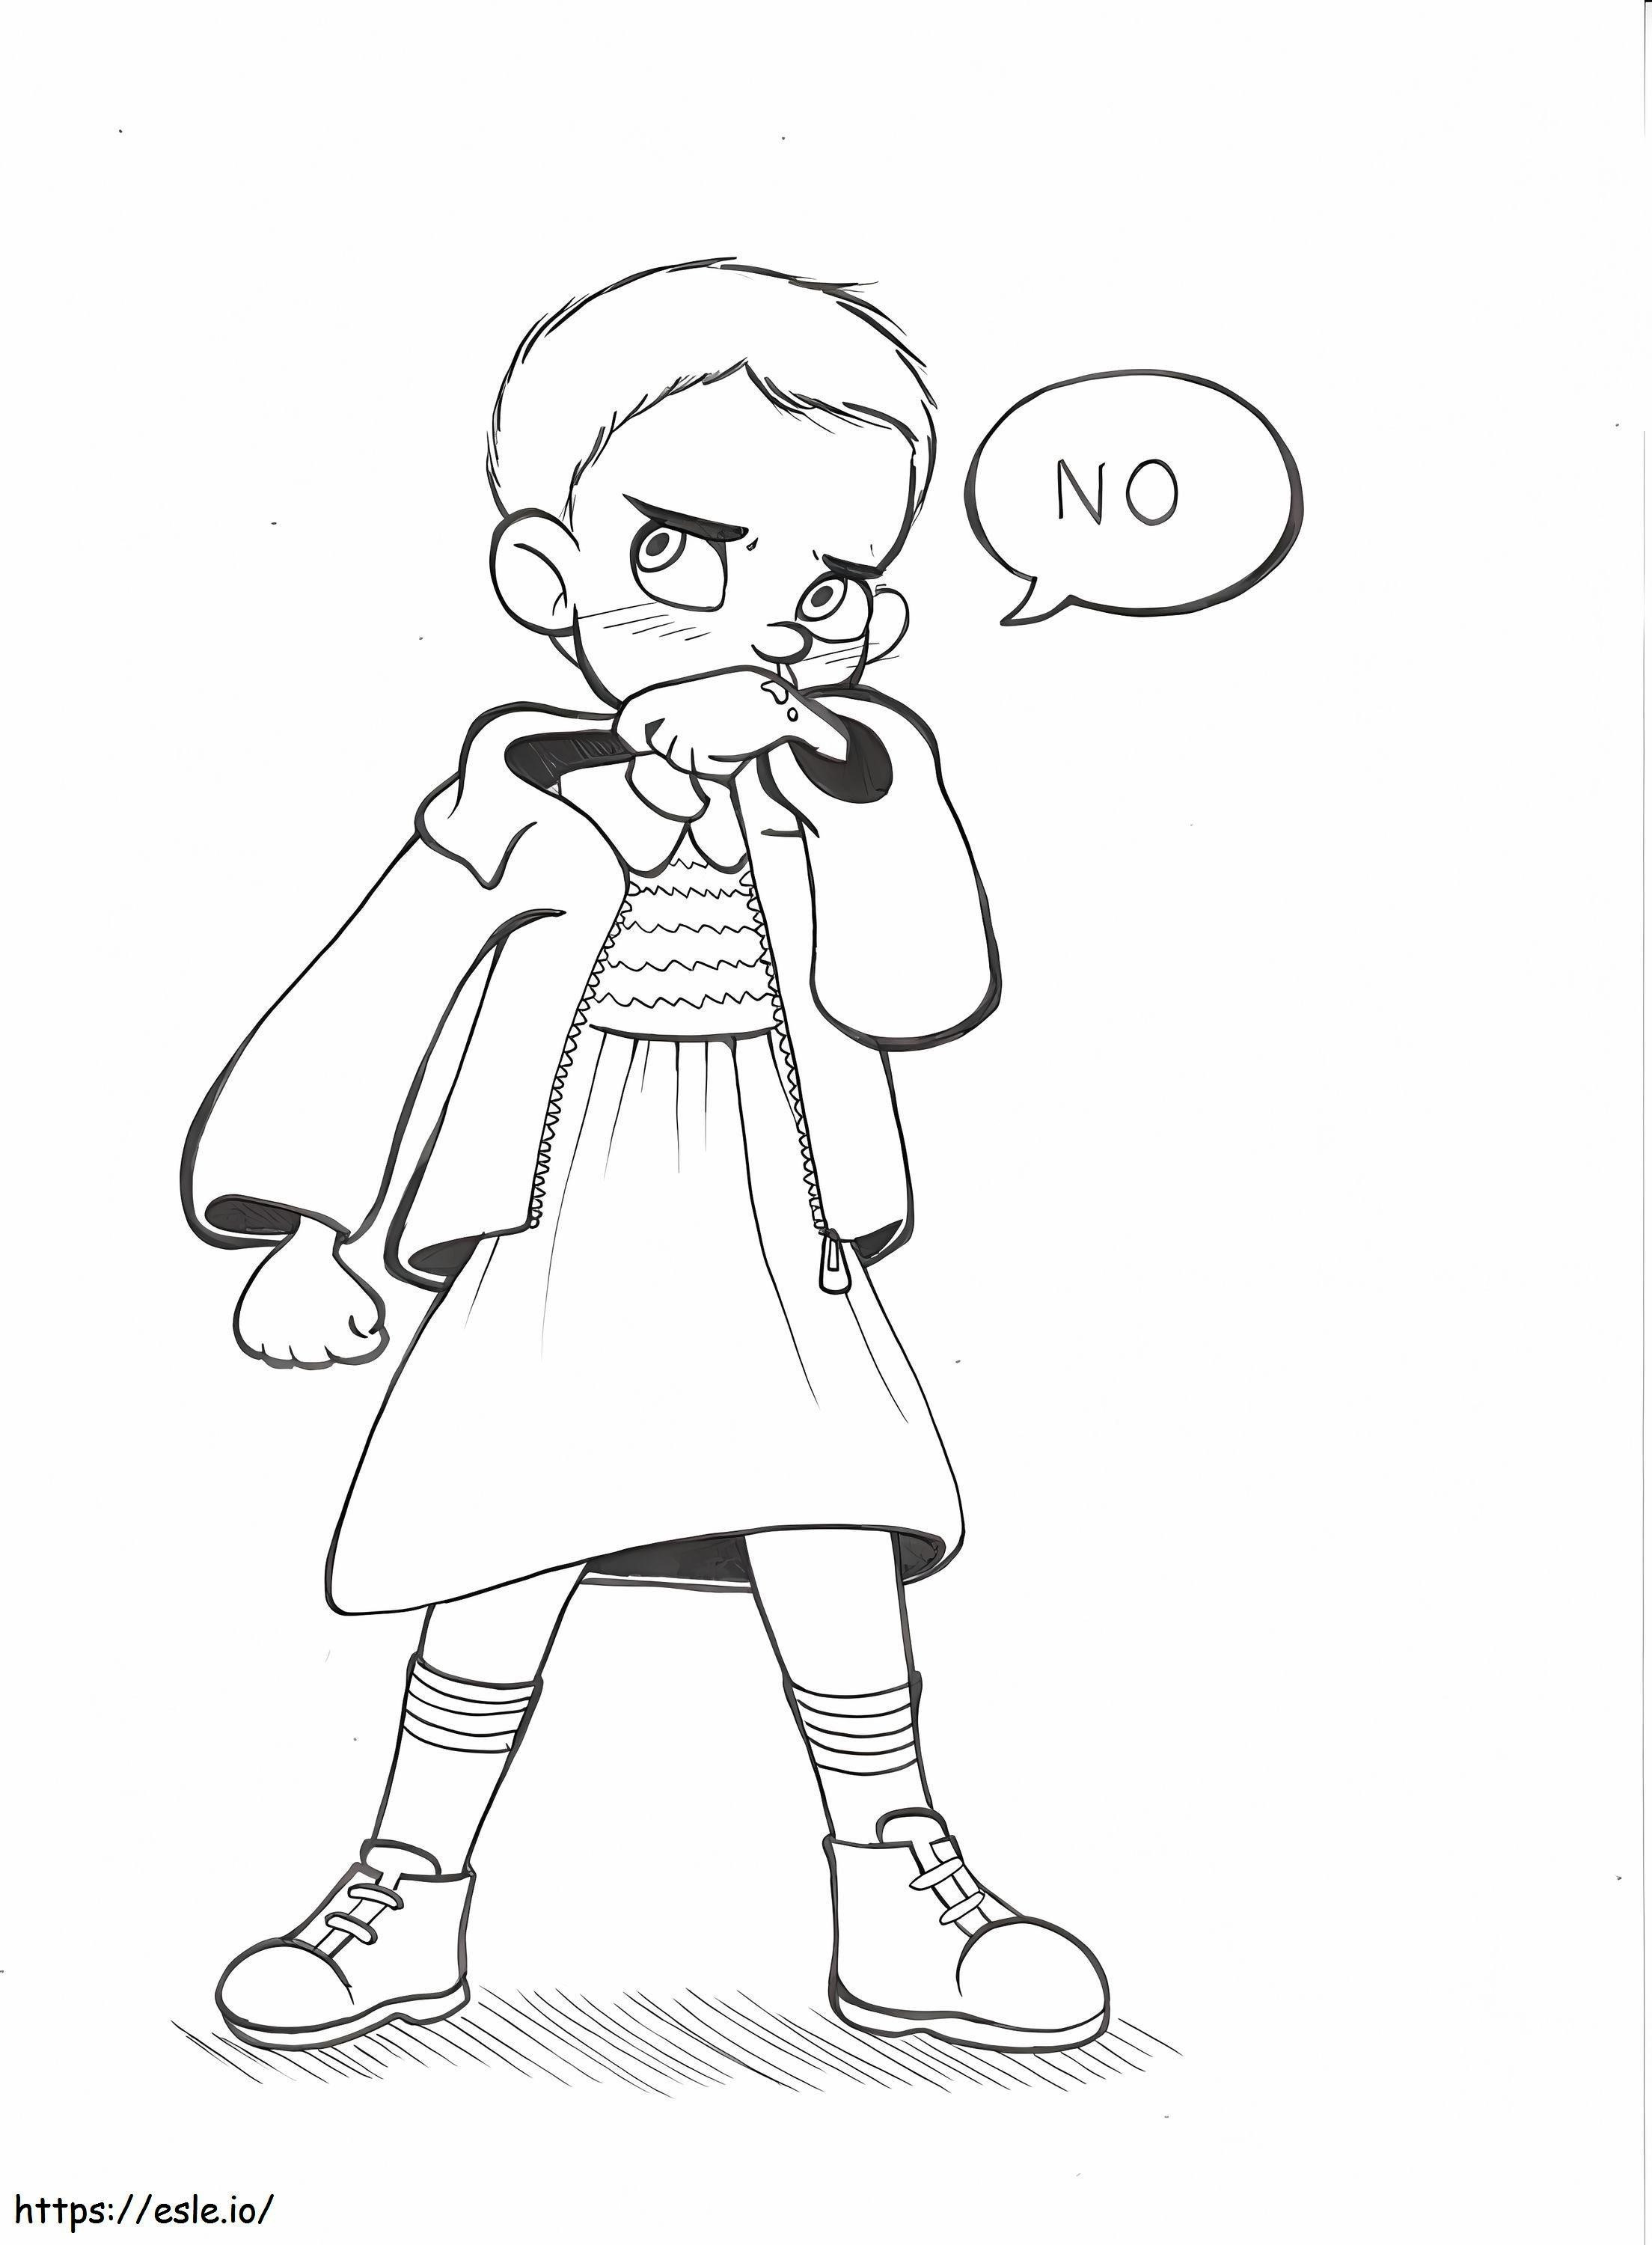 Eleven Stranger Things Coloring Page 3 coloring page